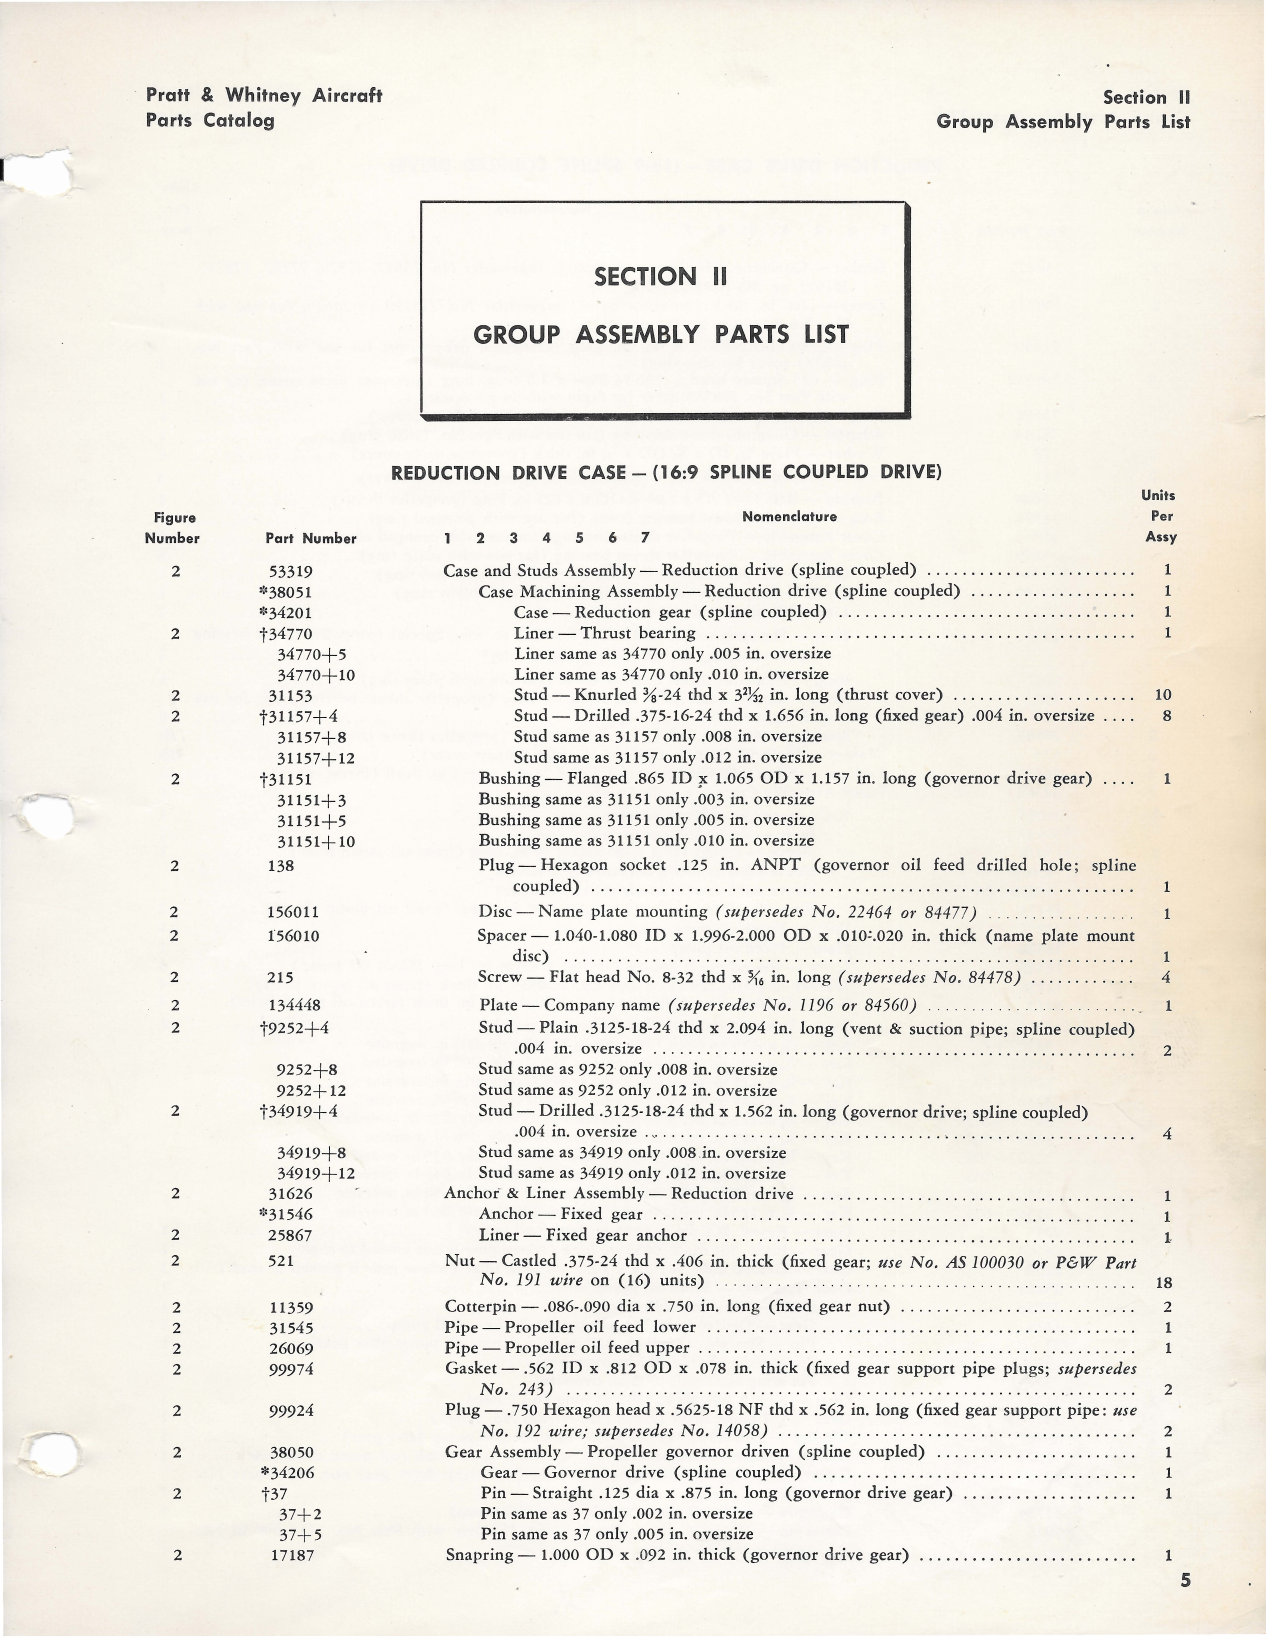 Sample page 7 from AirCorps Library document: Parts Catalog for Twin Wasp R-1830 - S1C3G